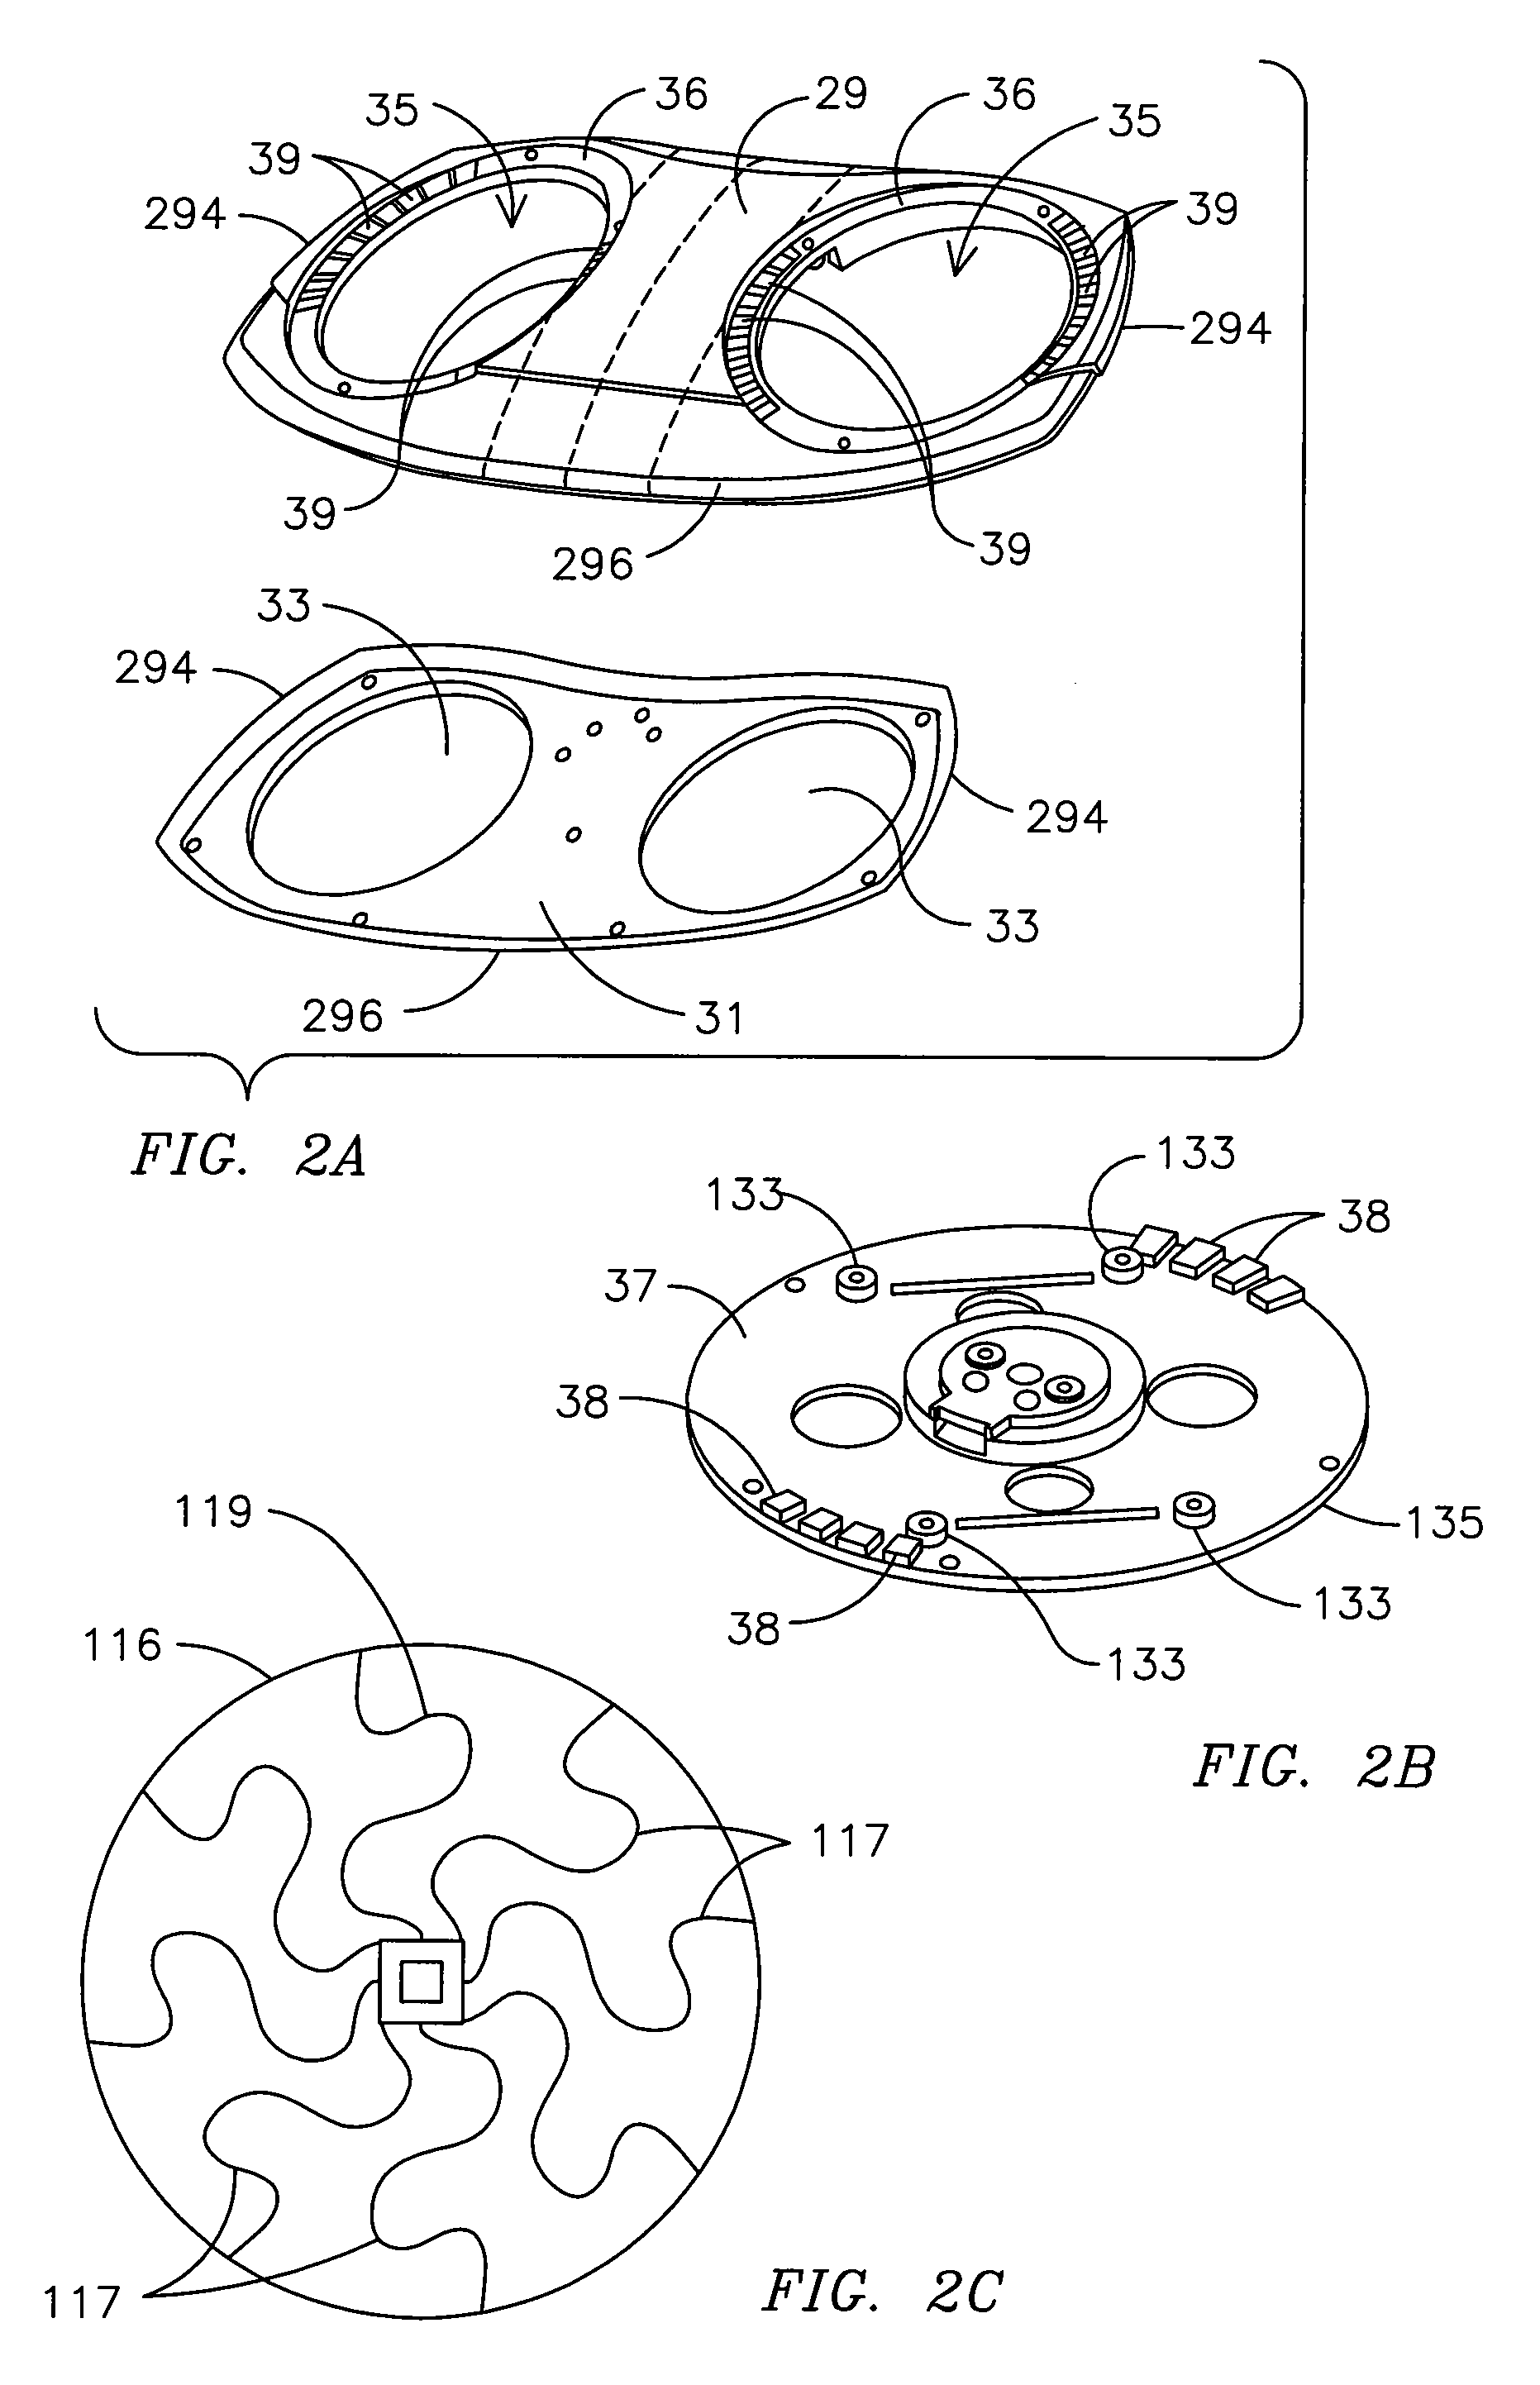 Apparatus and method for generating data signals